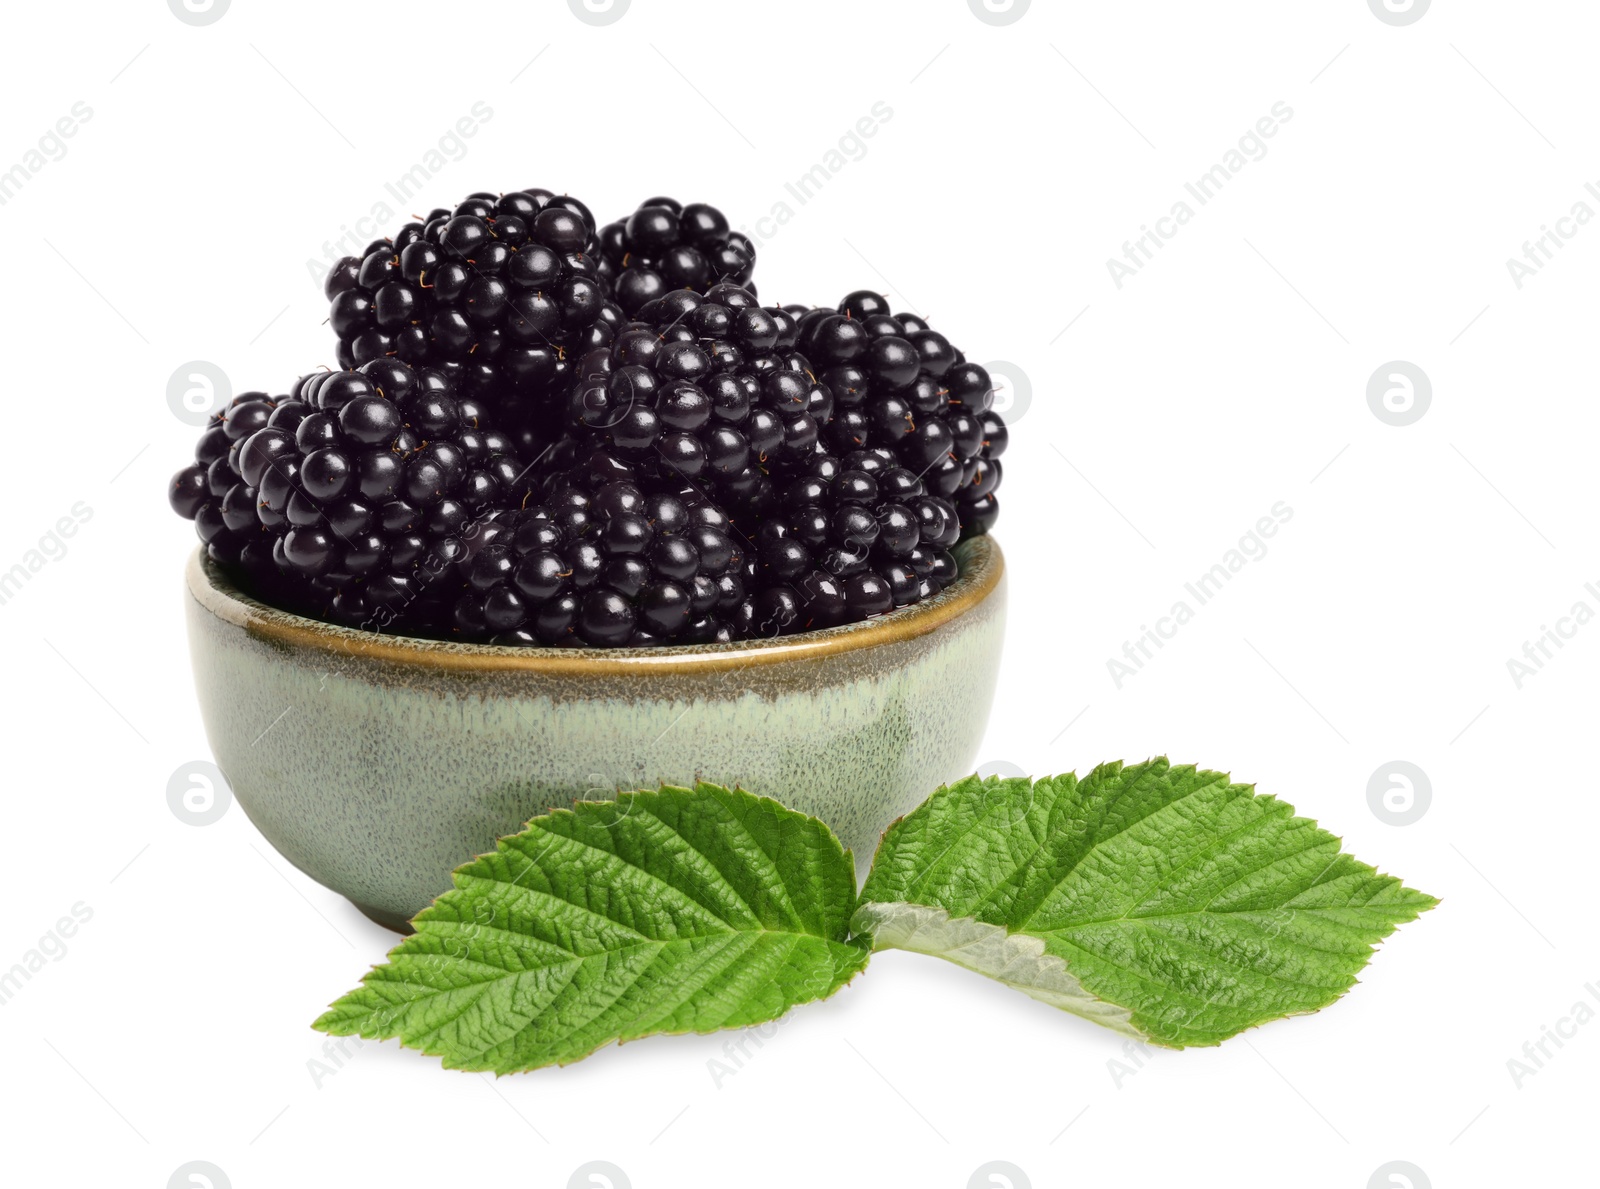 Photo of Bowl of ripe blackberries and green leaves isolated on white